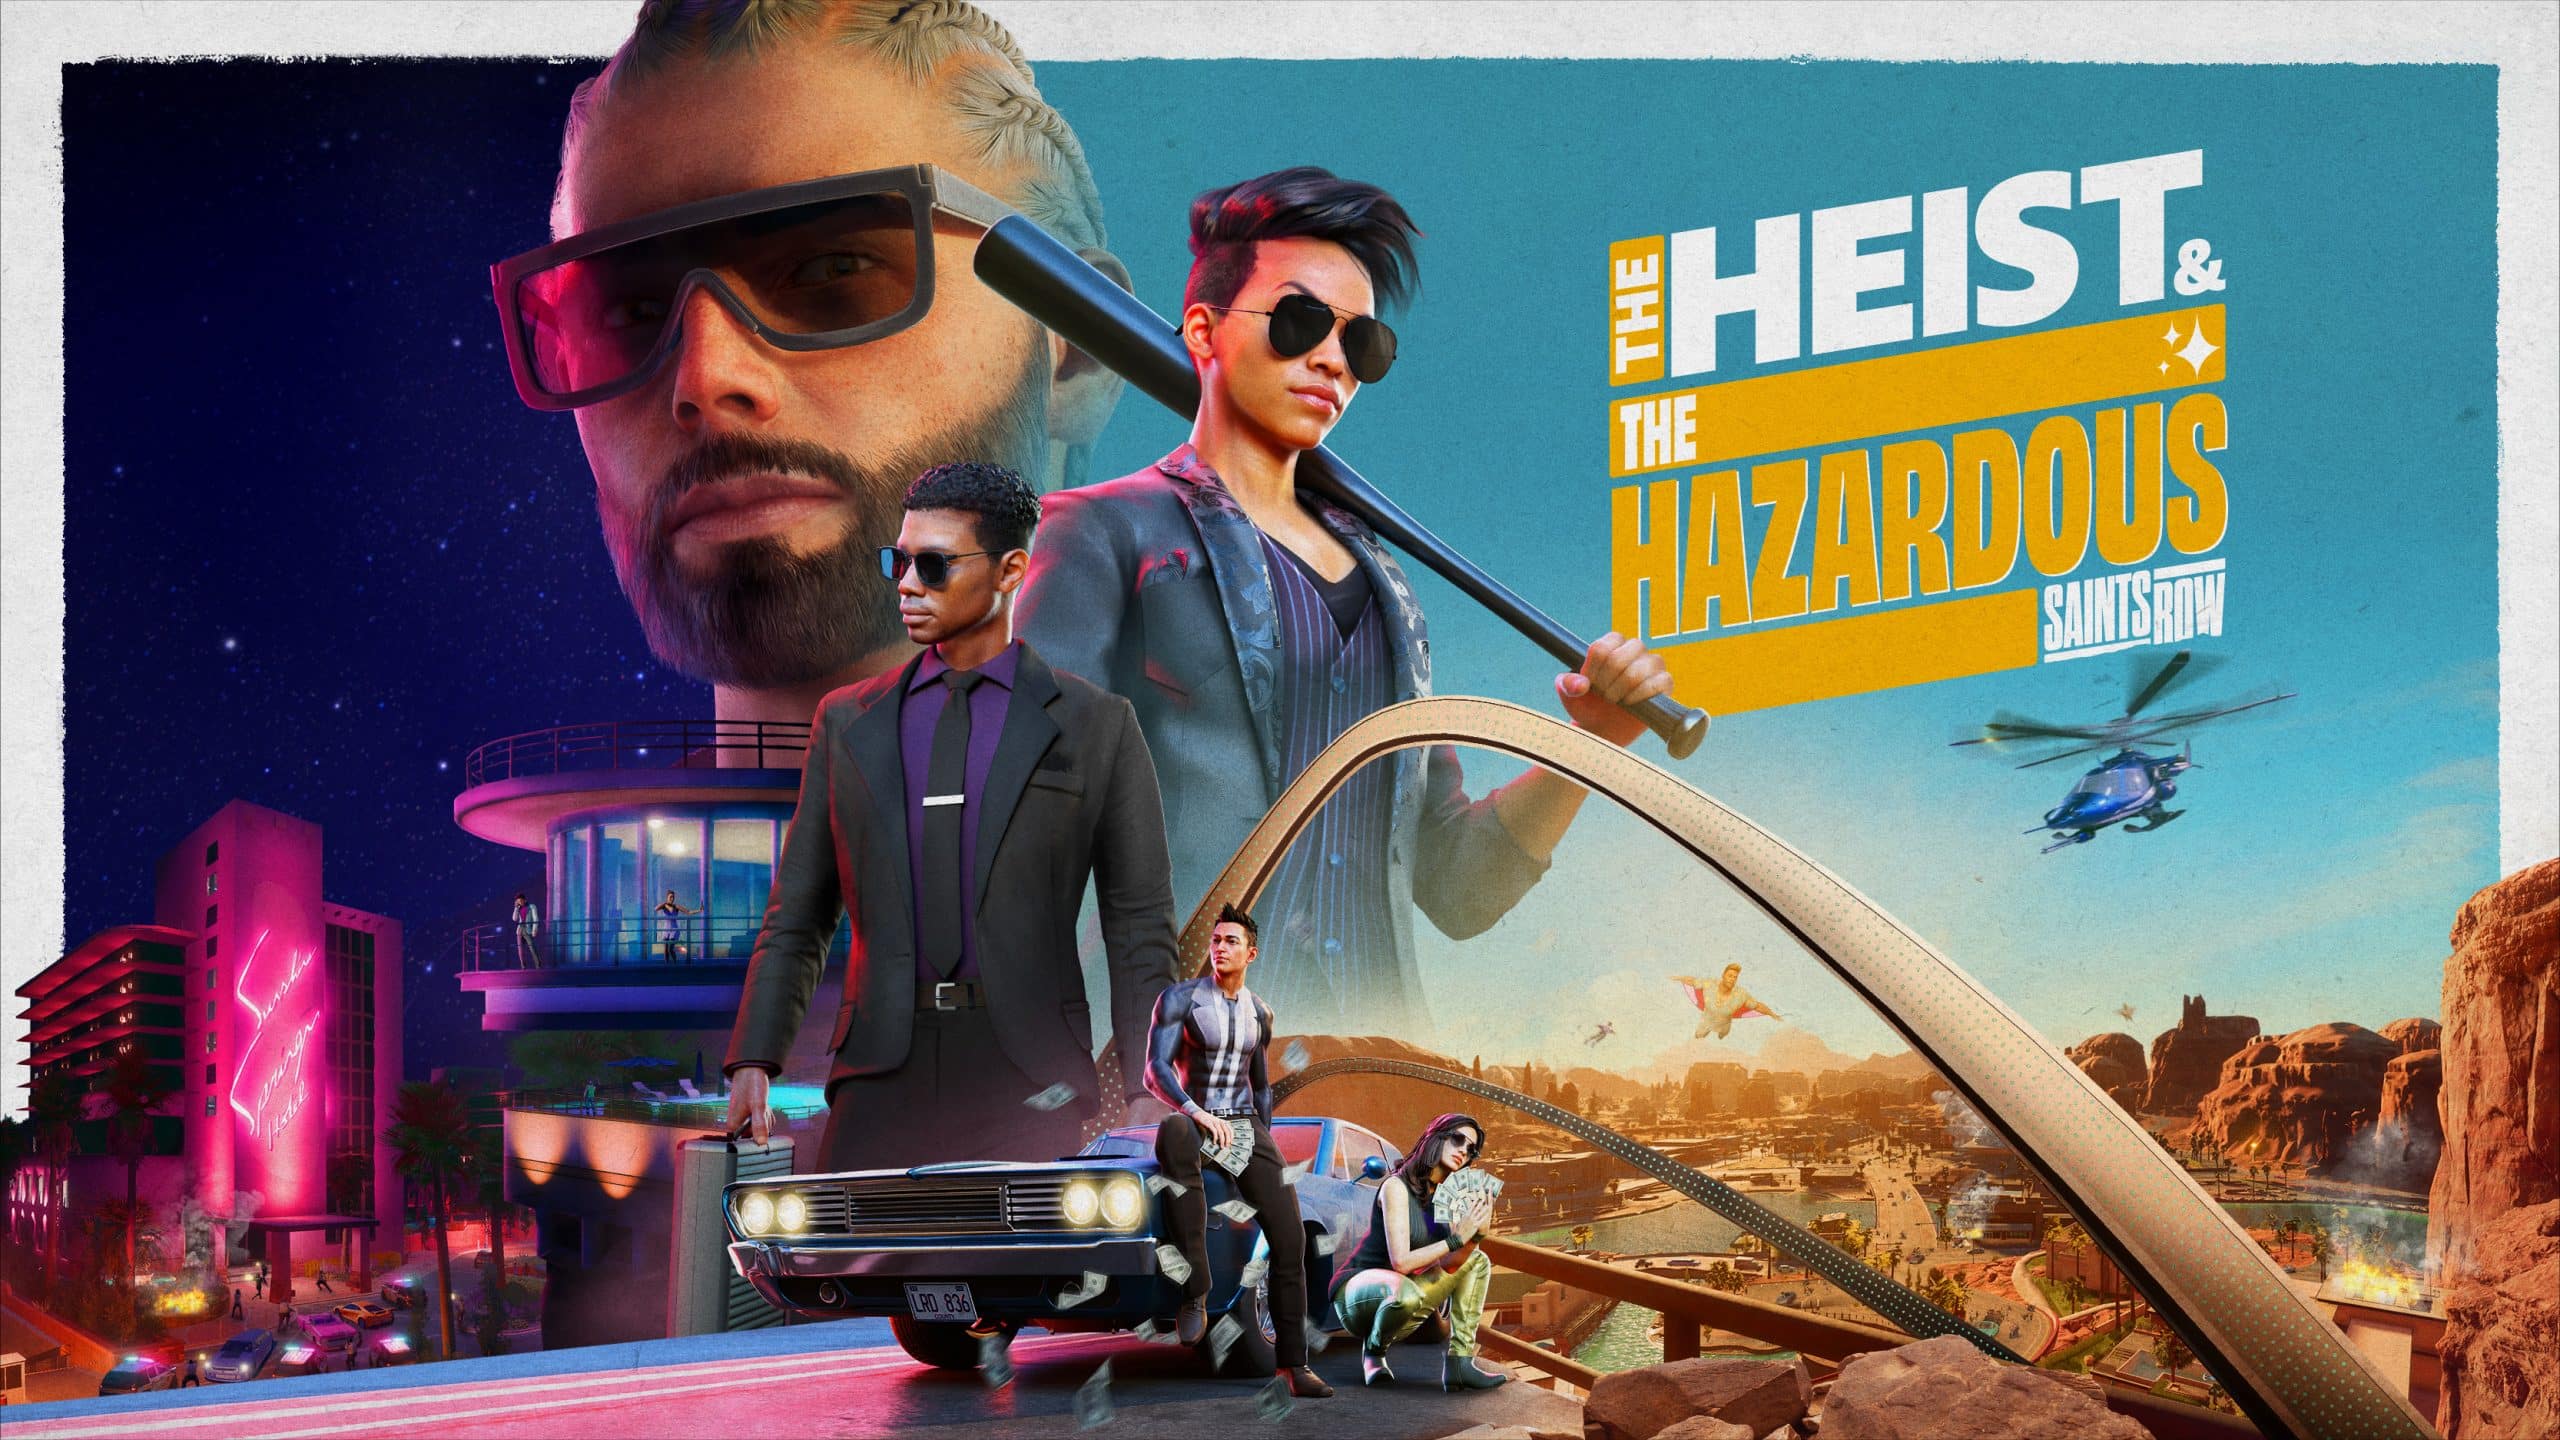 Saints Row The Heist and The Hazardous Expansion Releases May 9